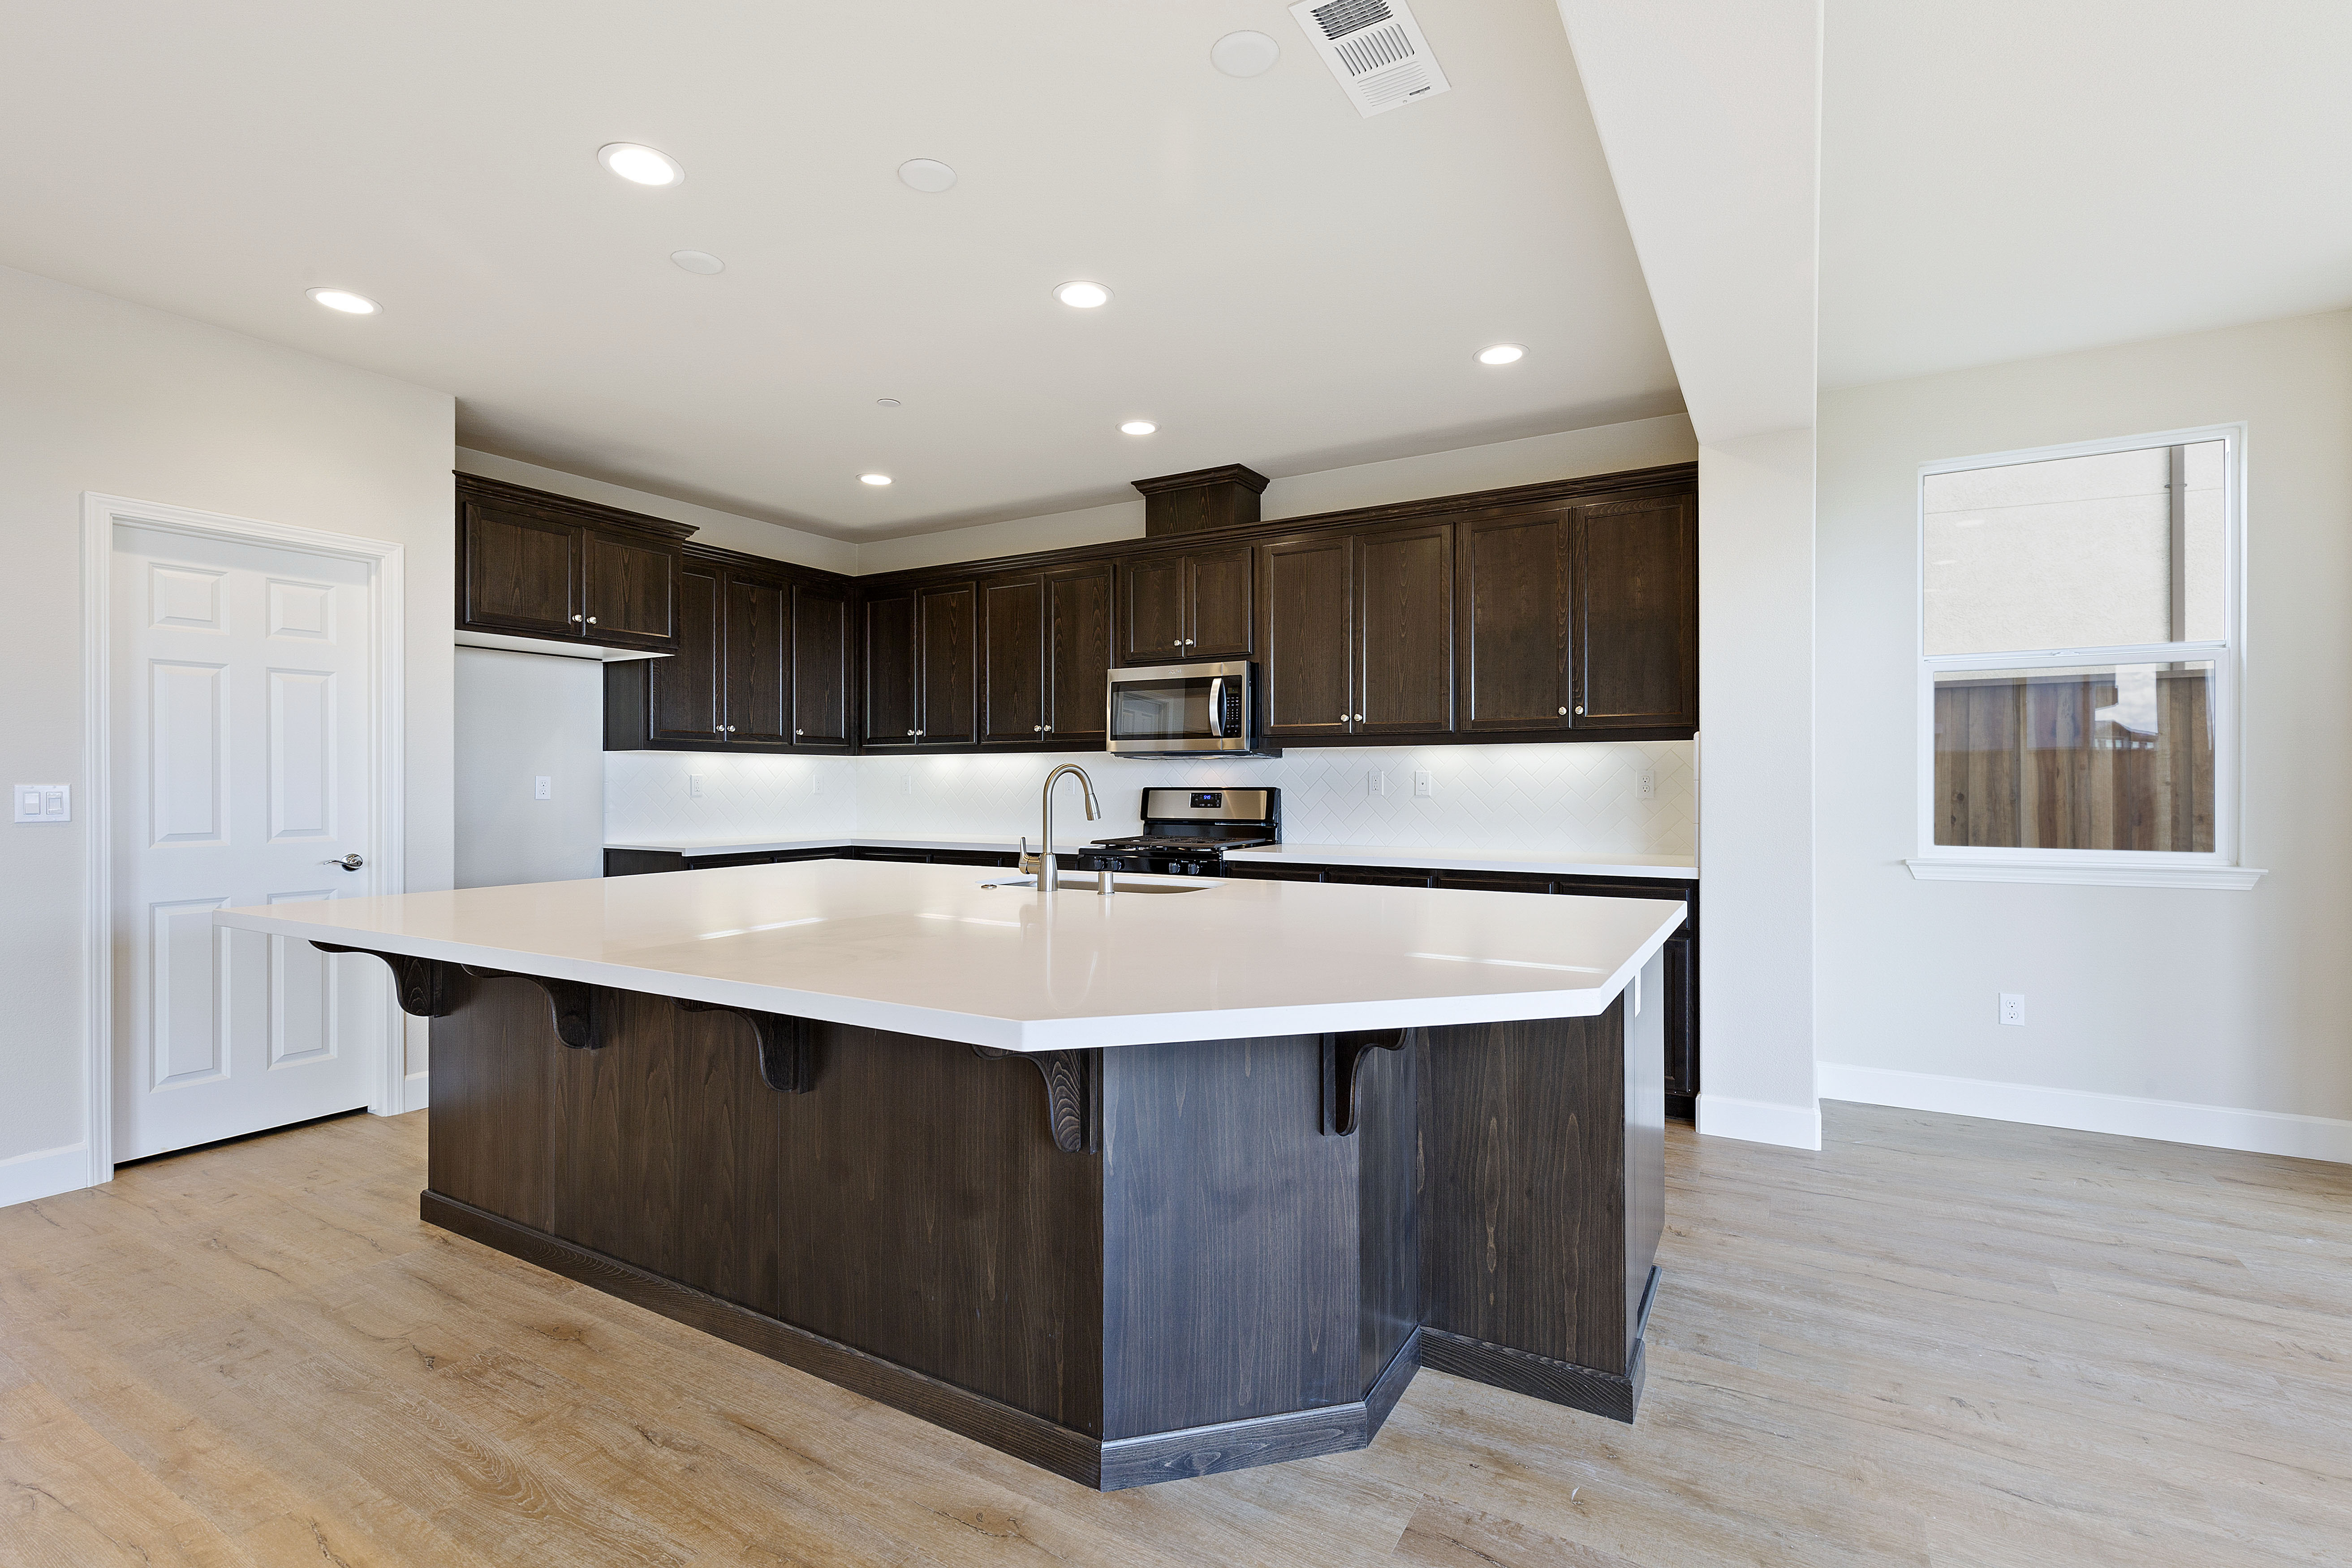 Cabinets and countertops | Elite Builder Services